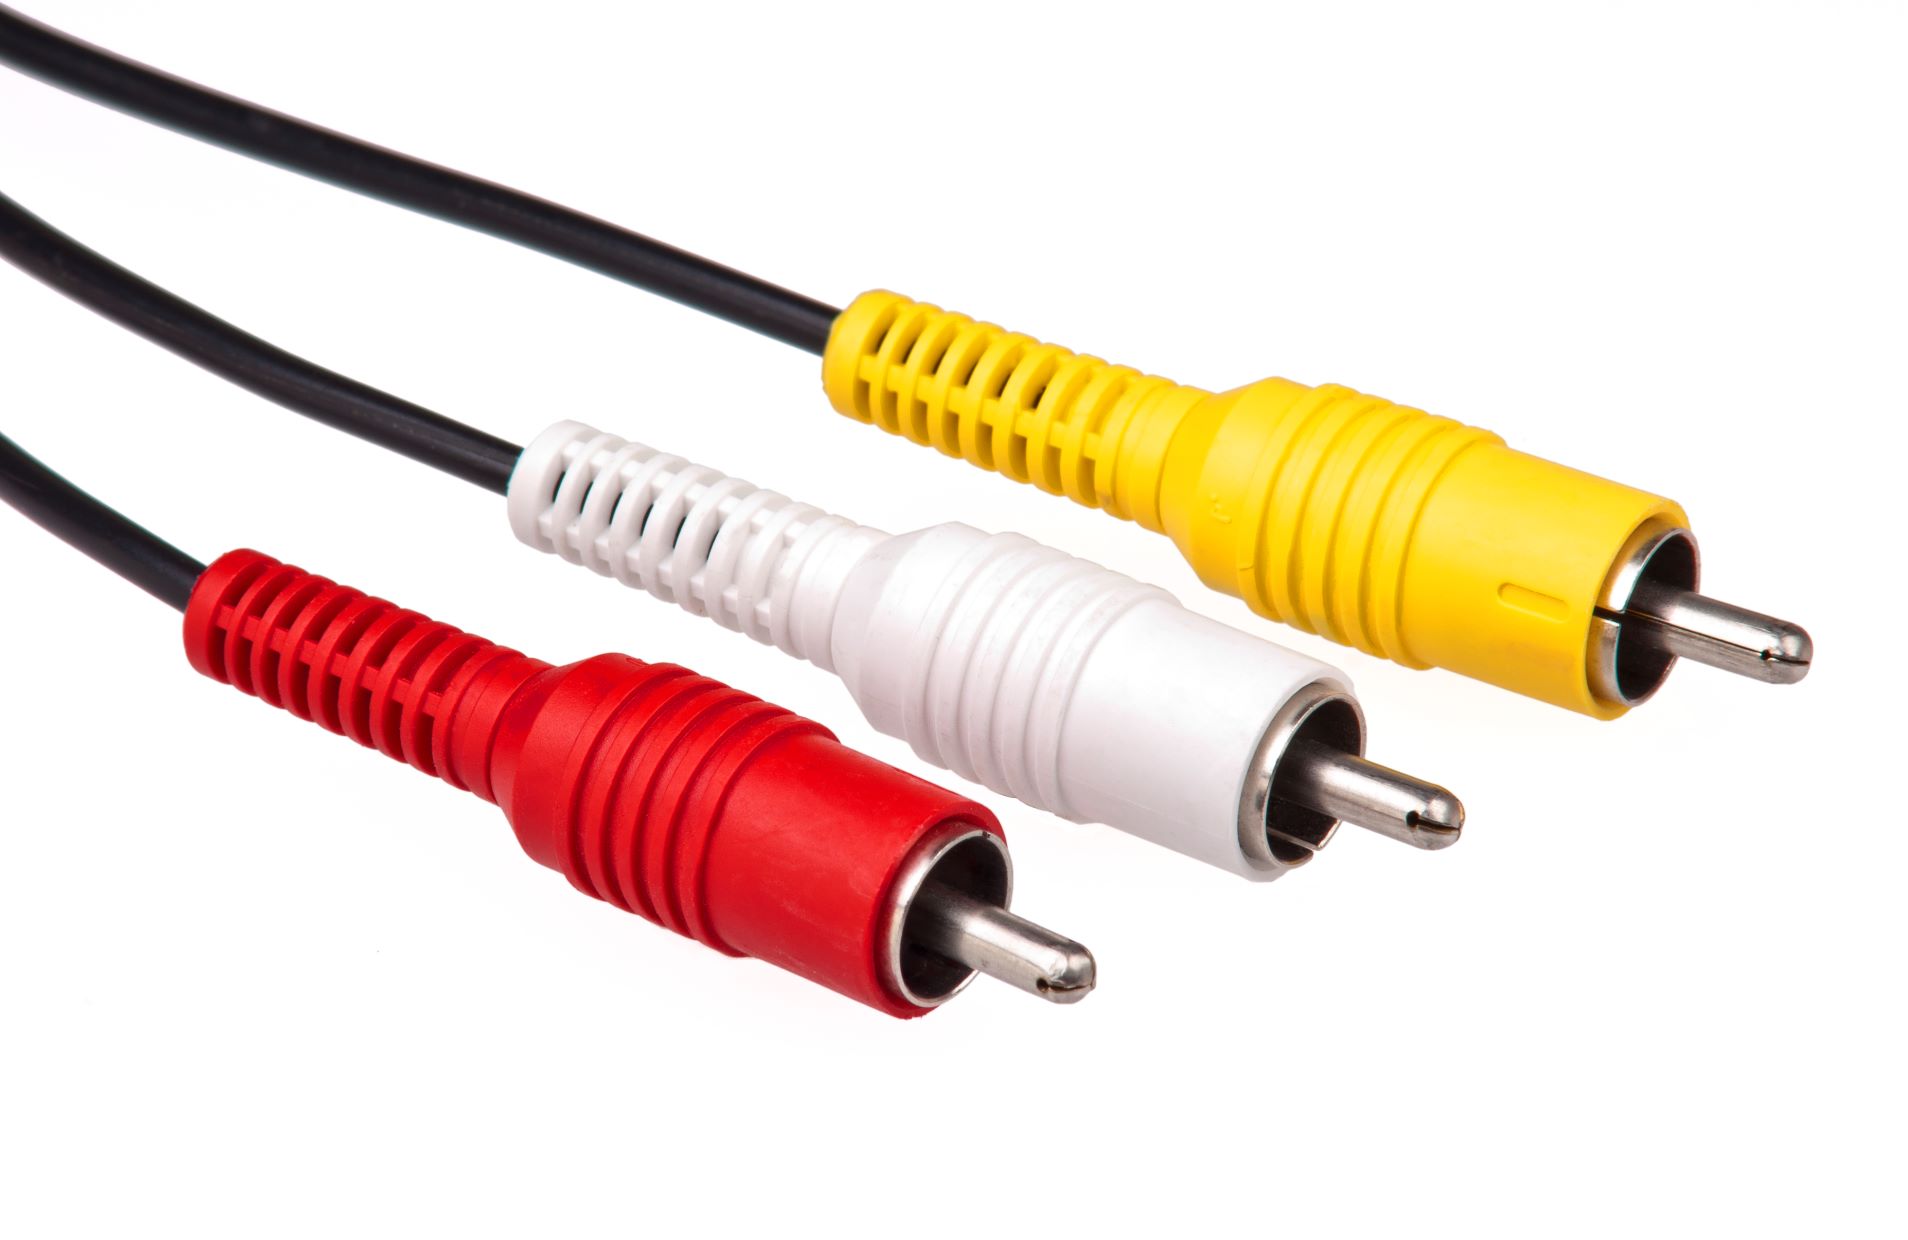 What Are The Different Types Of Audio Cable Ends Called